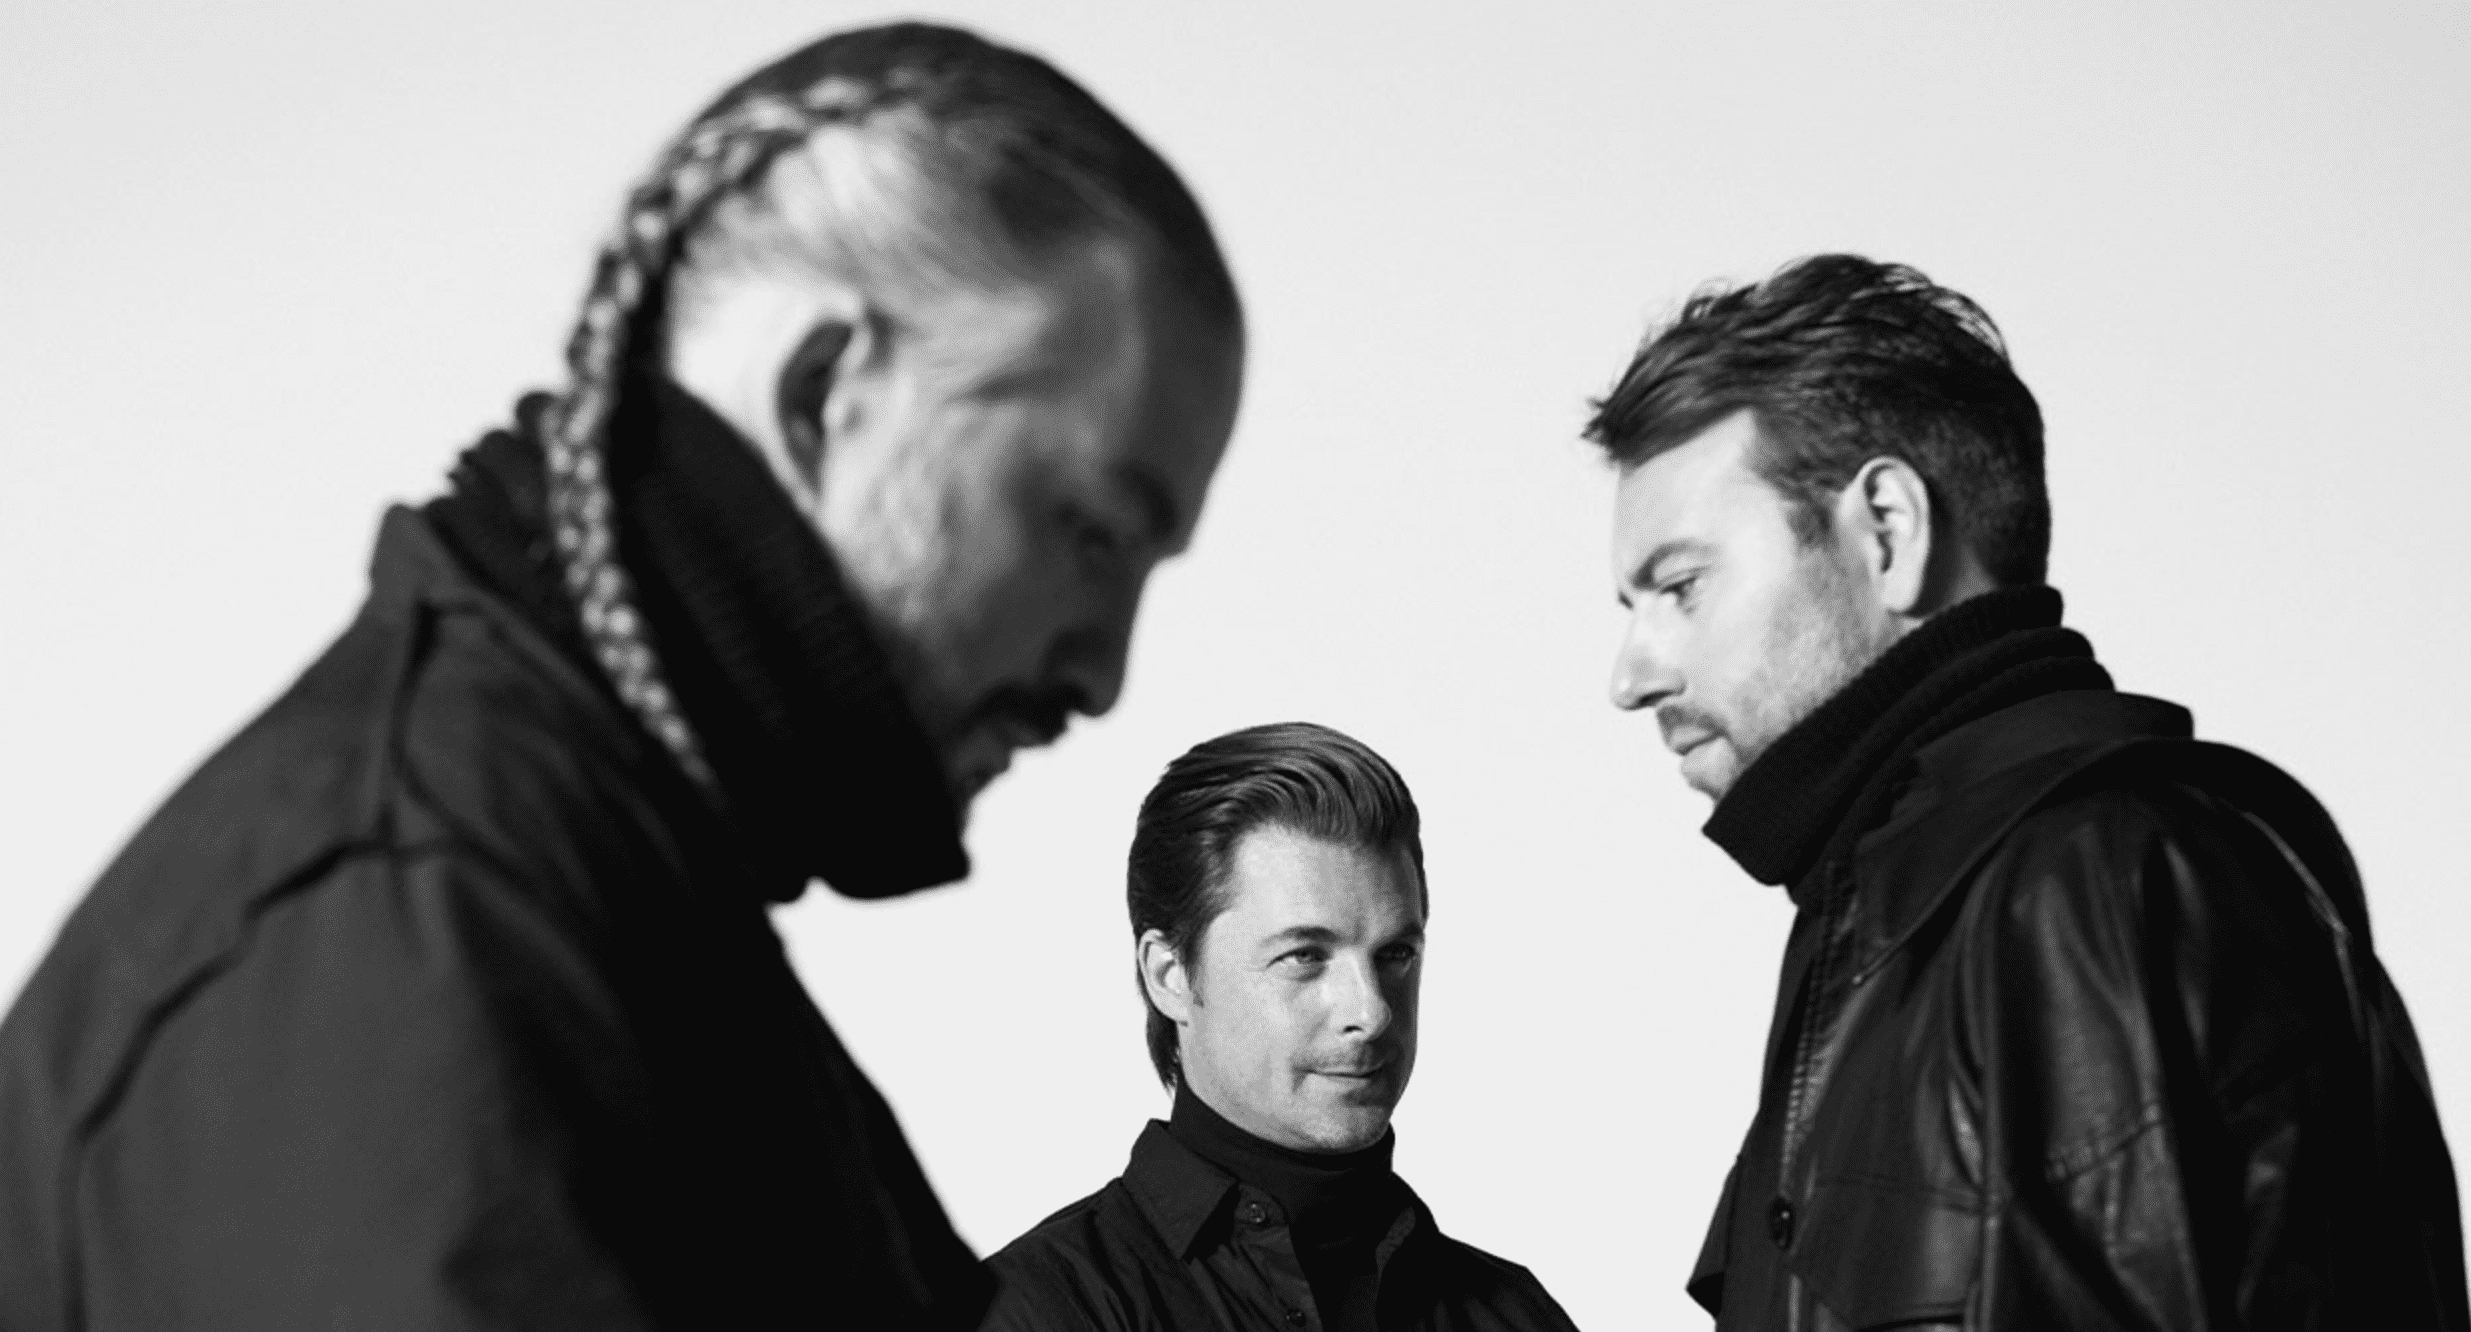 Swedish House Mafia unveil recomposition of ‘One’ titled ‘One Symphony’ releasing this week